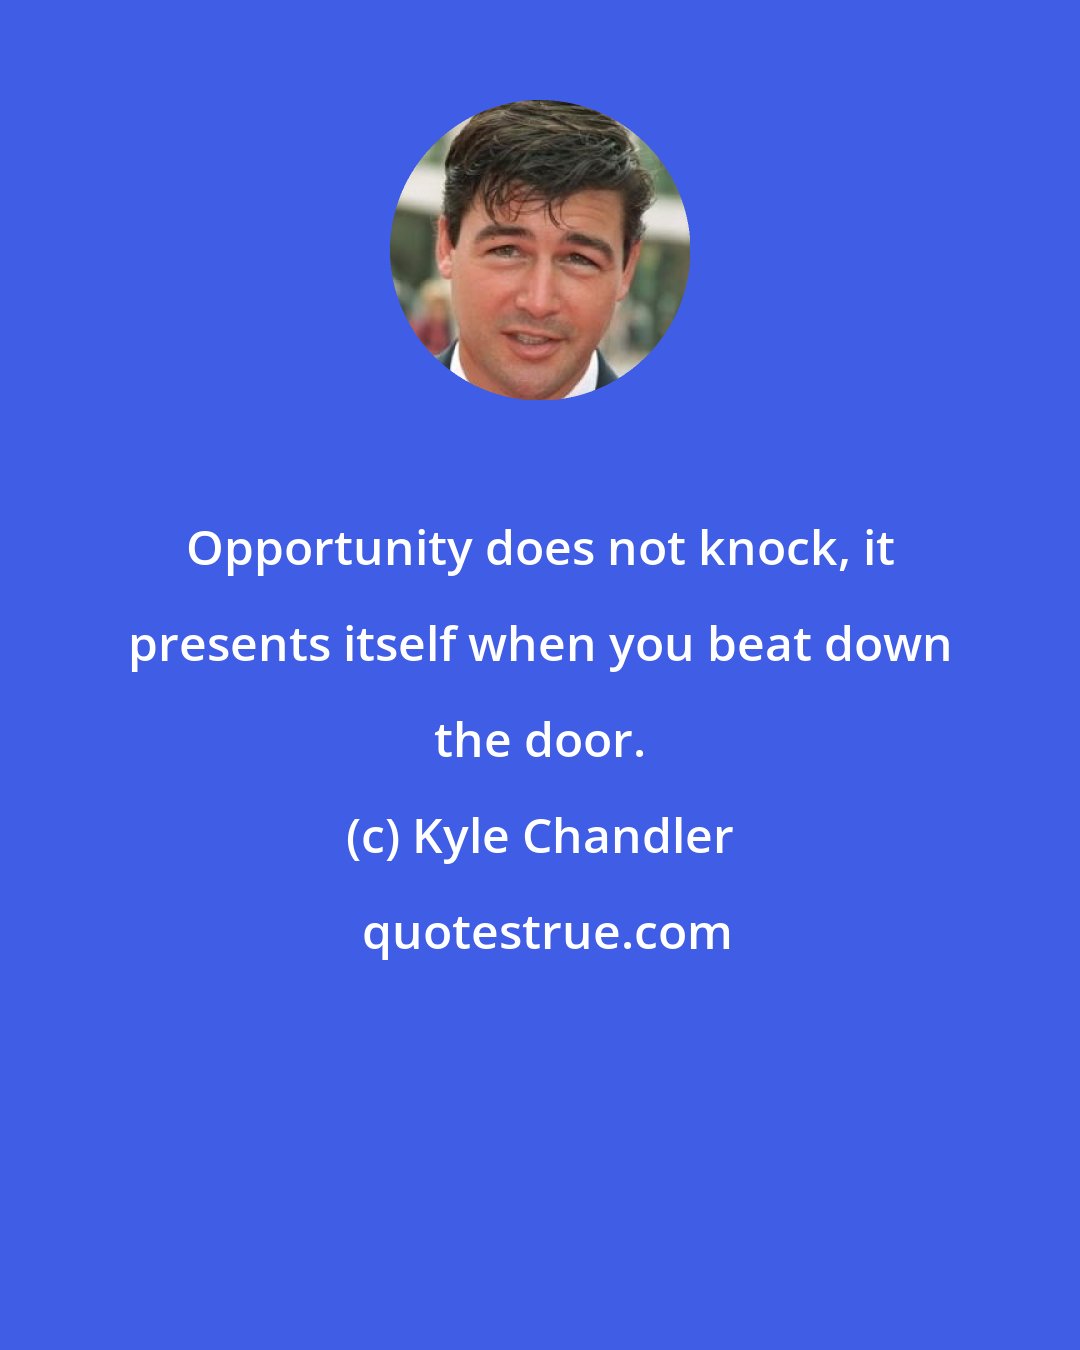 Kyle Chandler: Opportunity does not knock, it presents itself when you beat down the door.